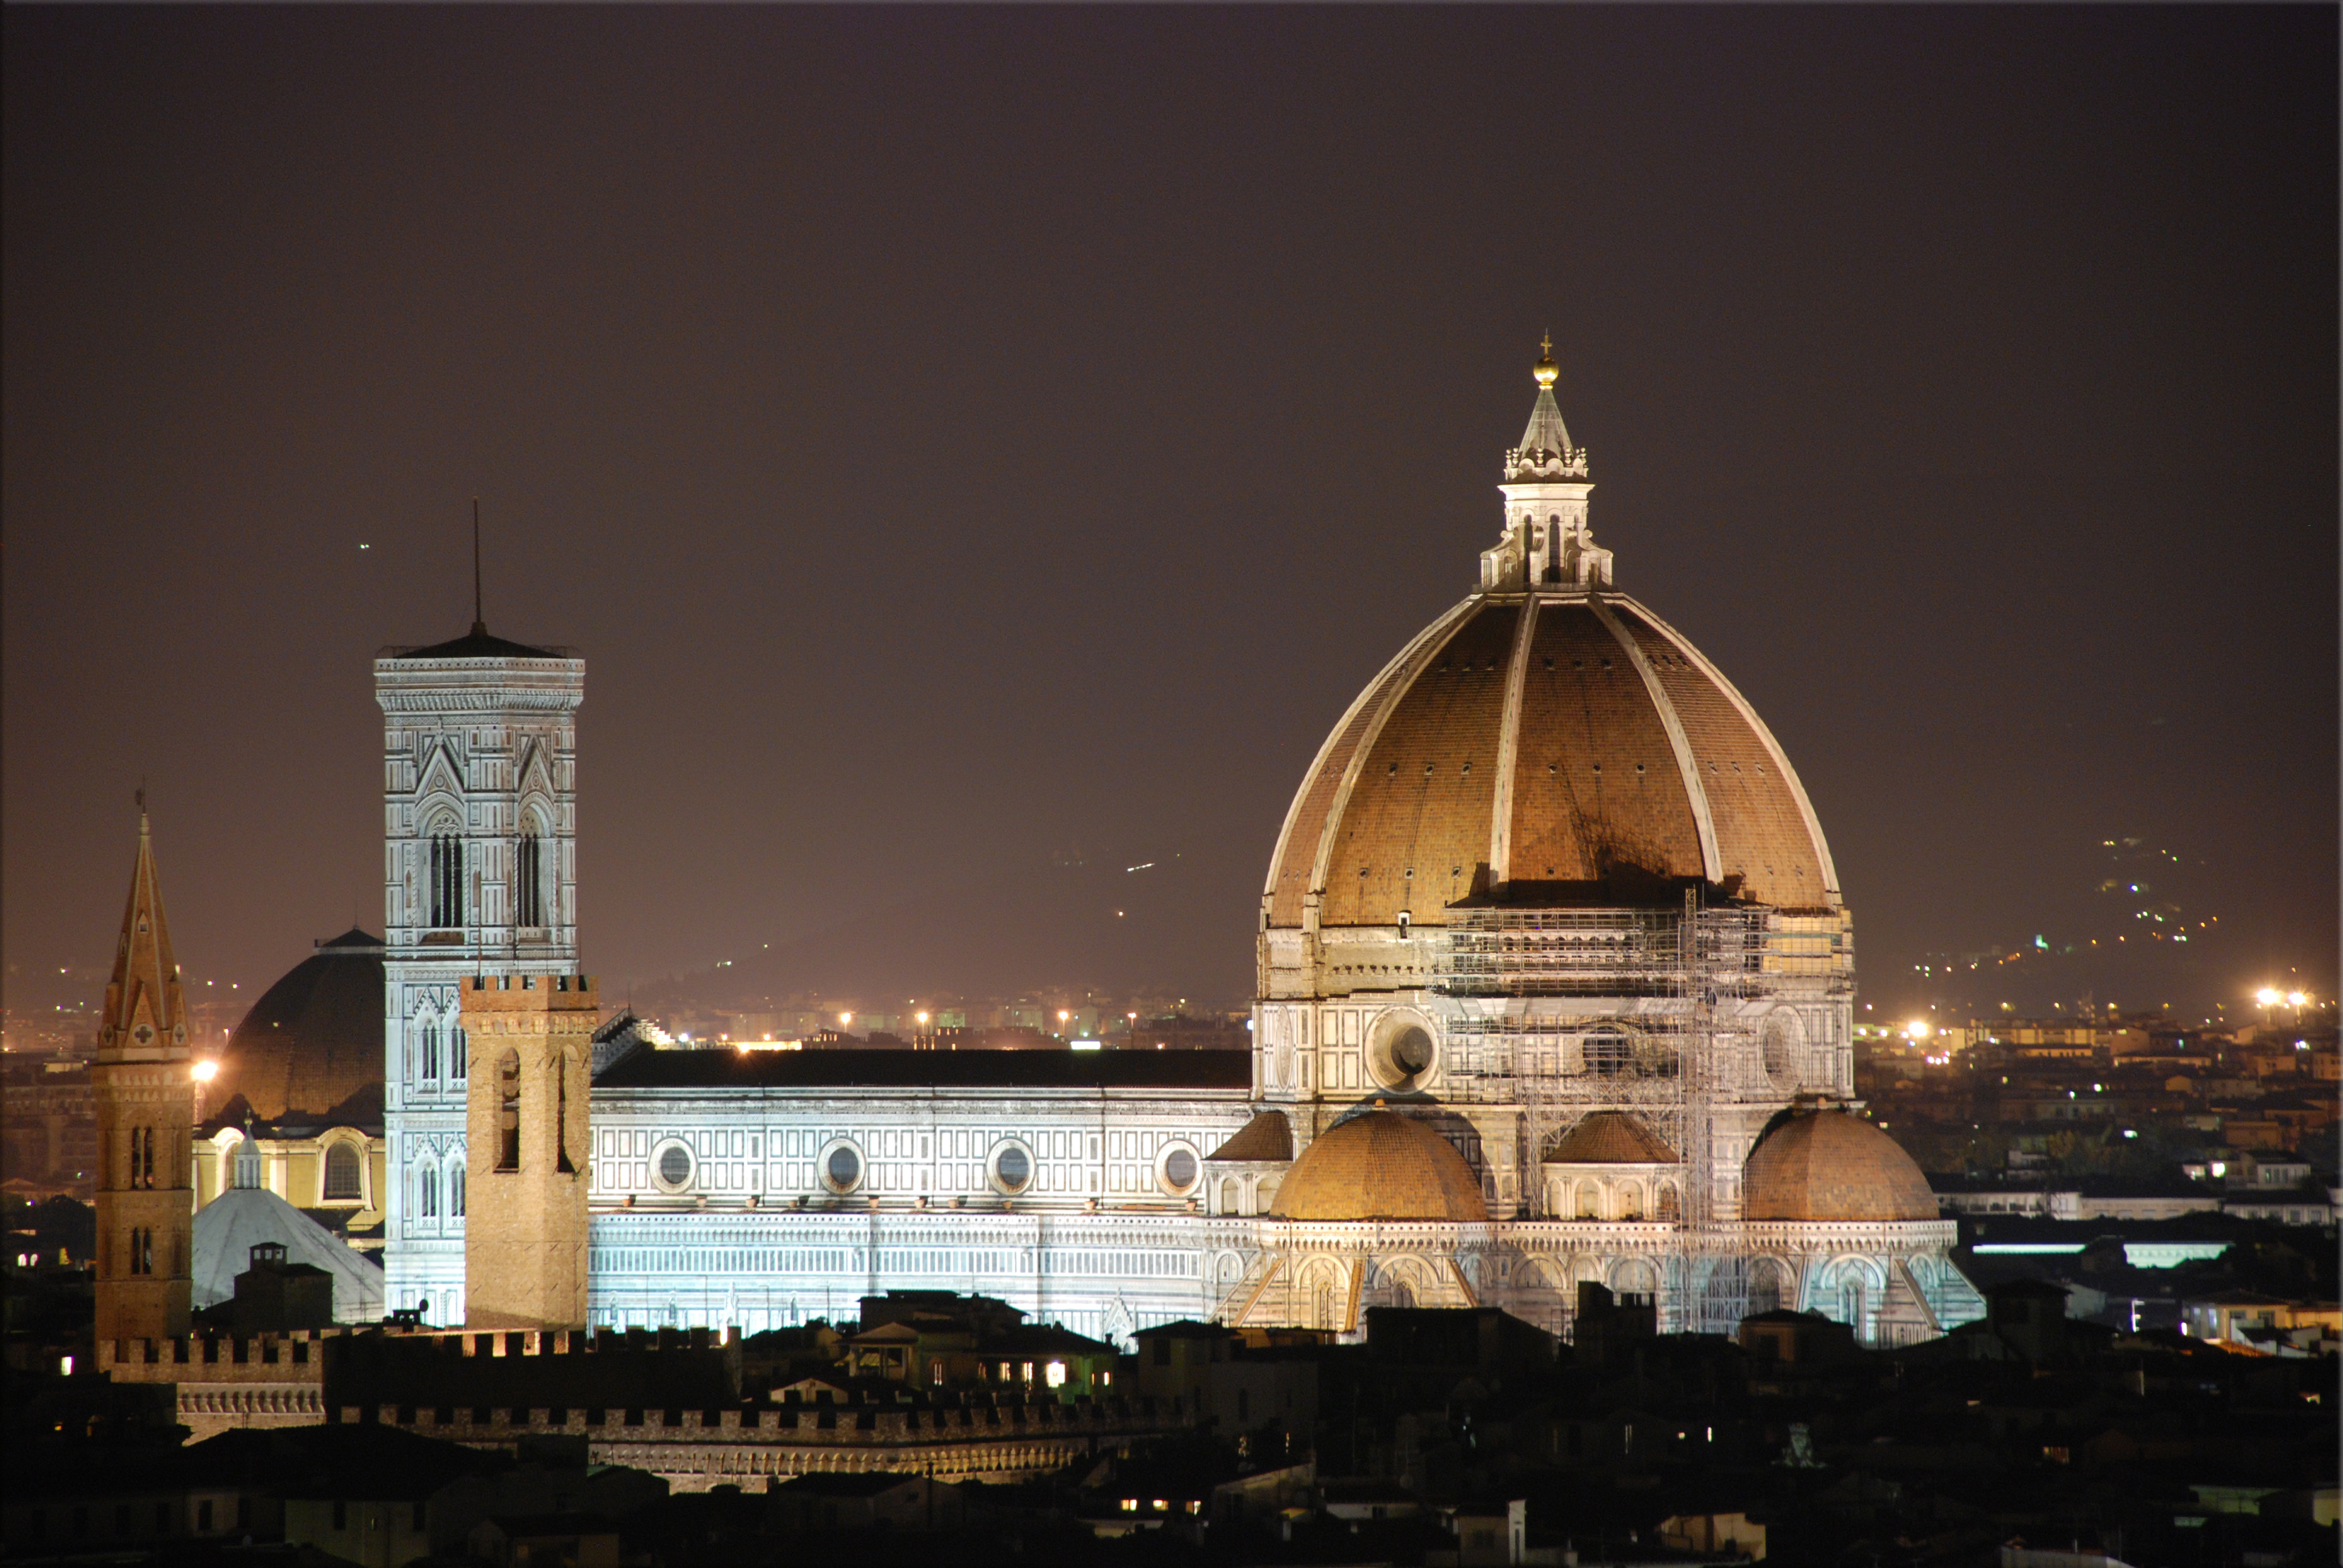 Construction of the dome of Santa Maria del Fiore begins in Florence